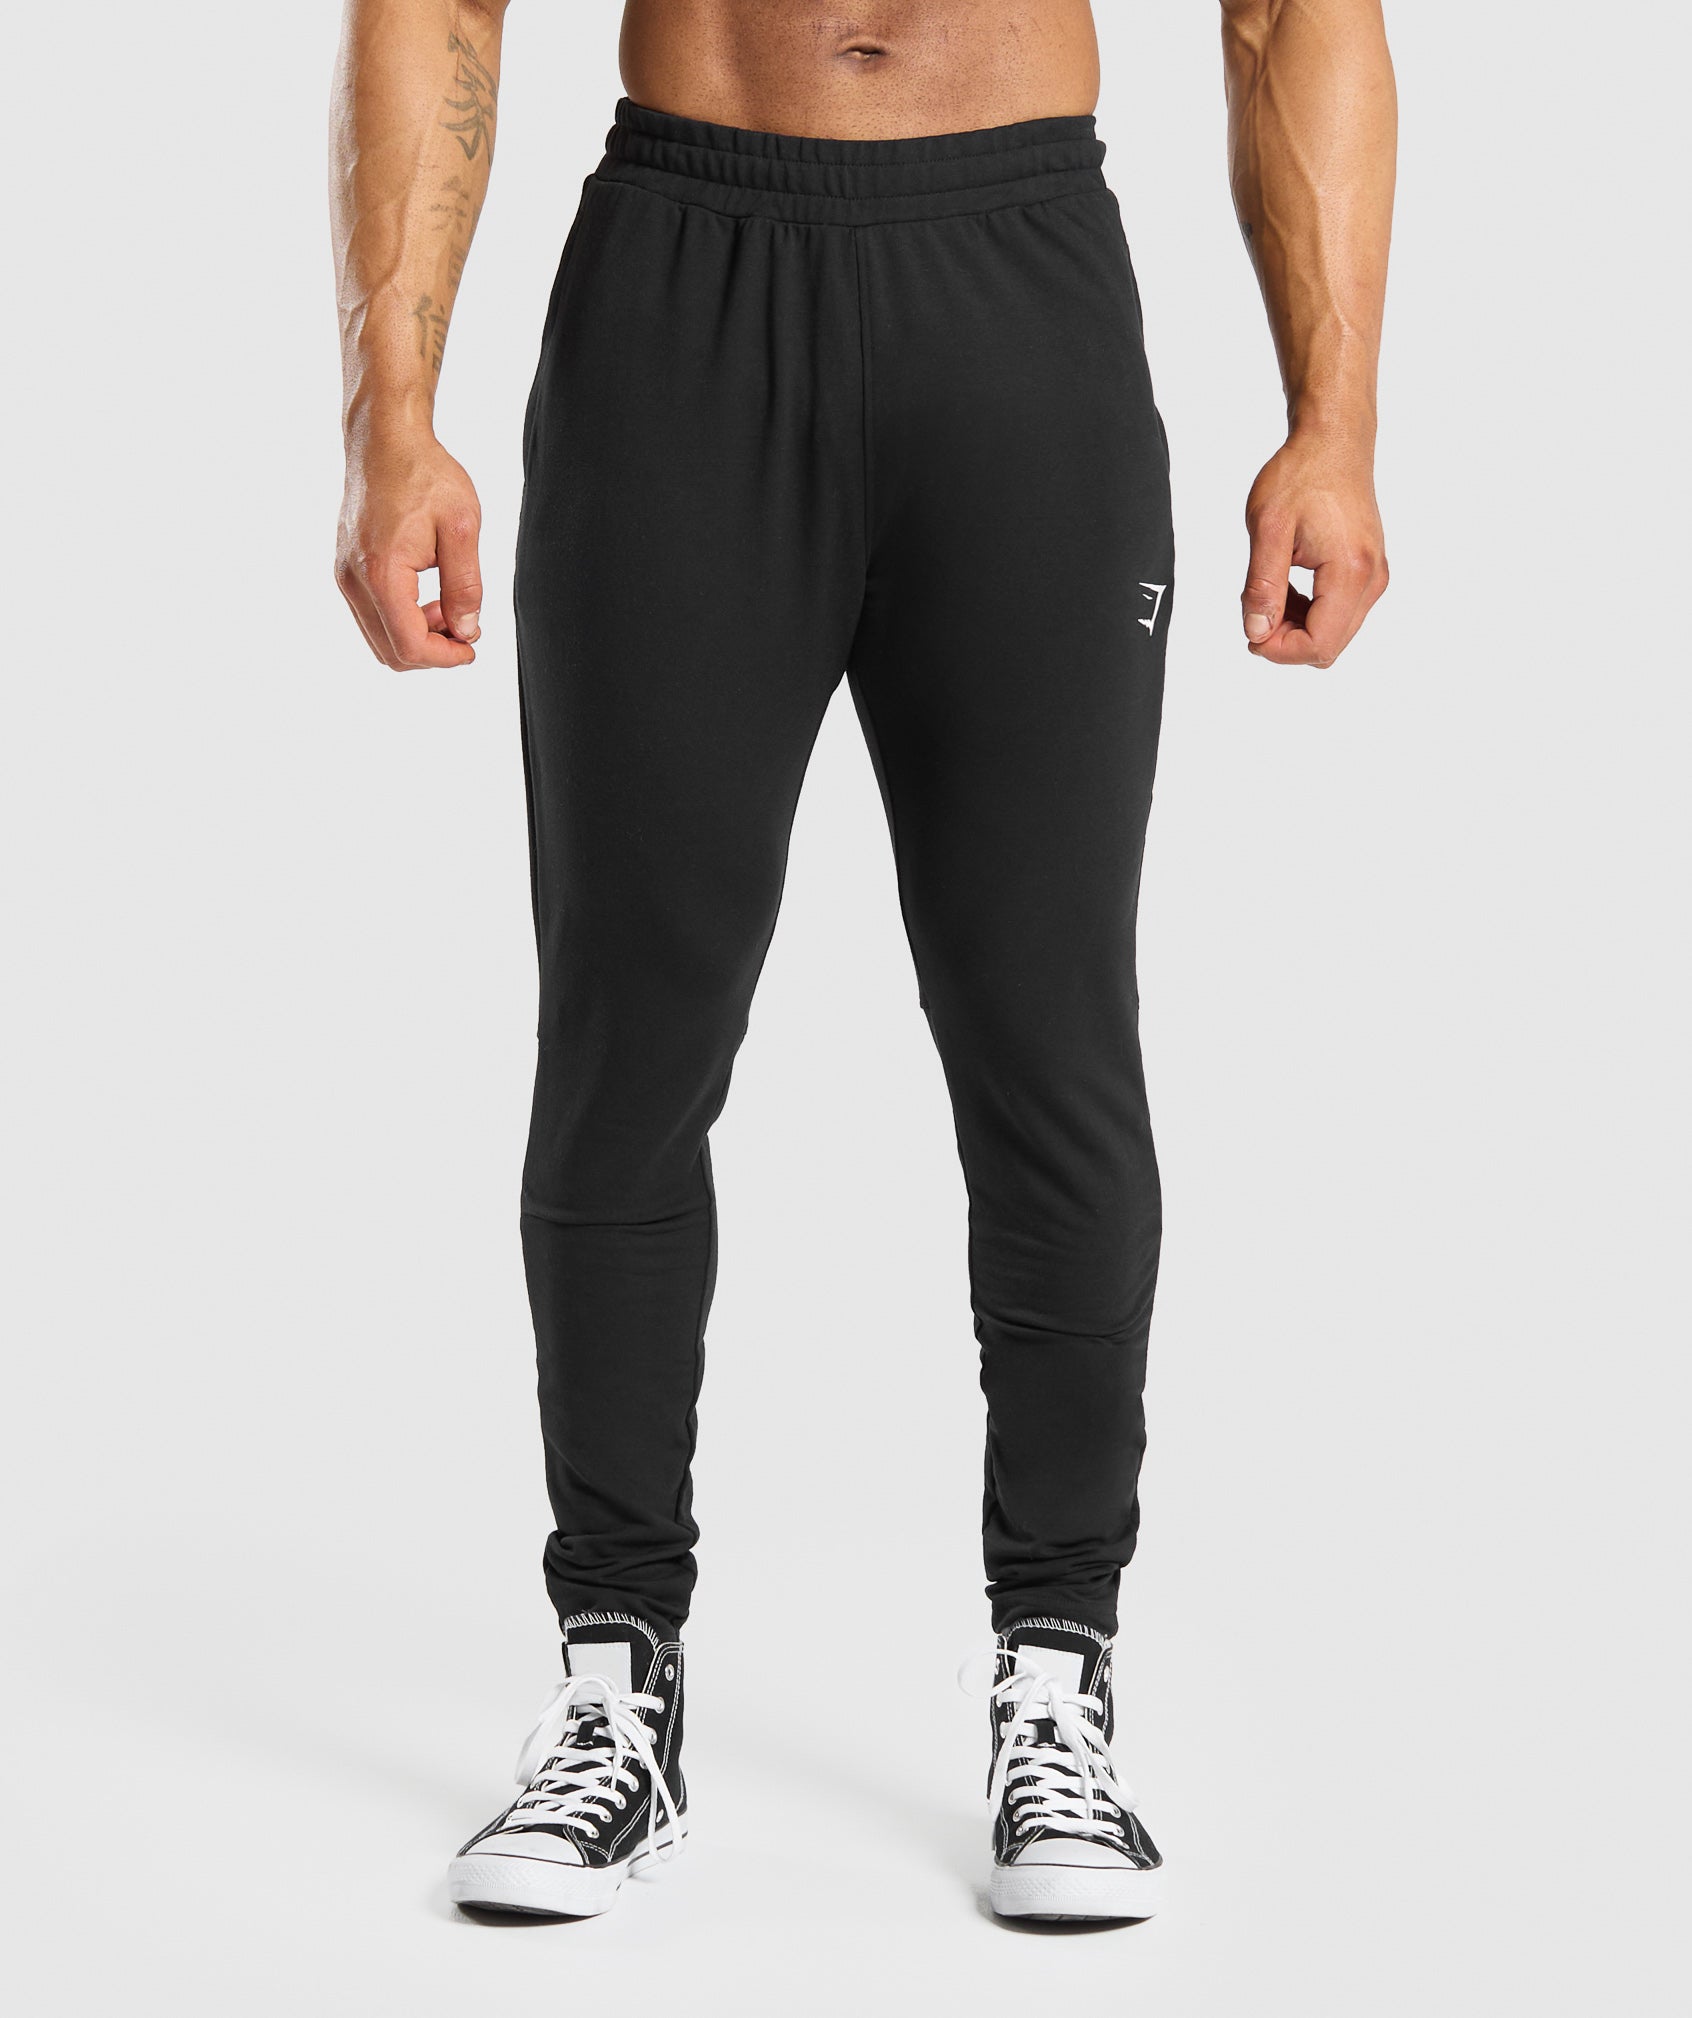 Essential Muscle Joggers in Black - view 1